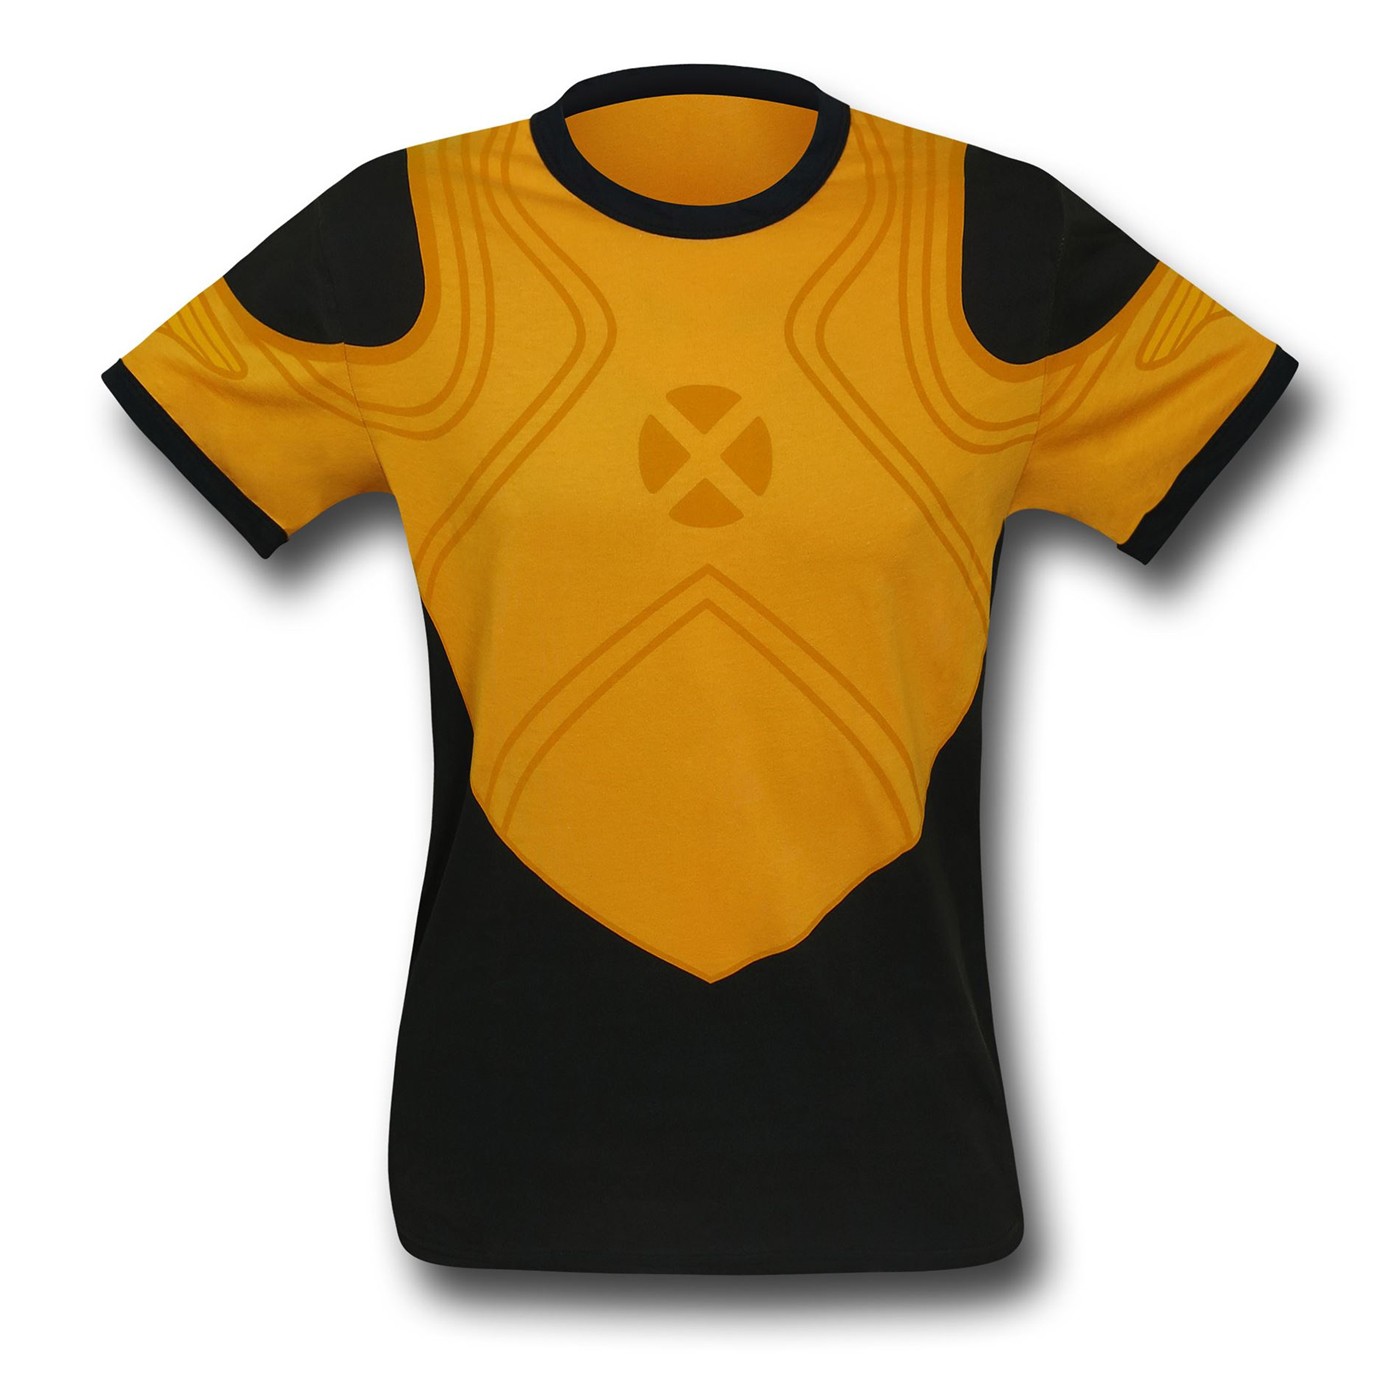 Wolverine All-New NOW 30 Single Costume T-Shirt